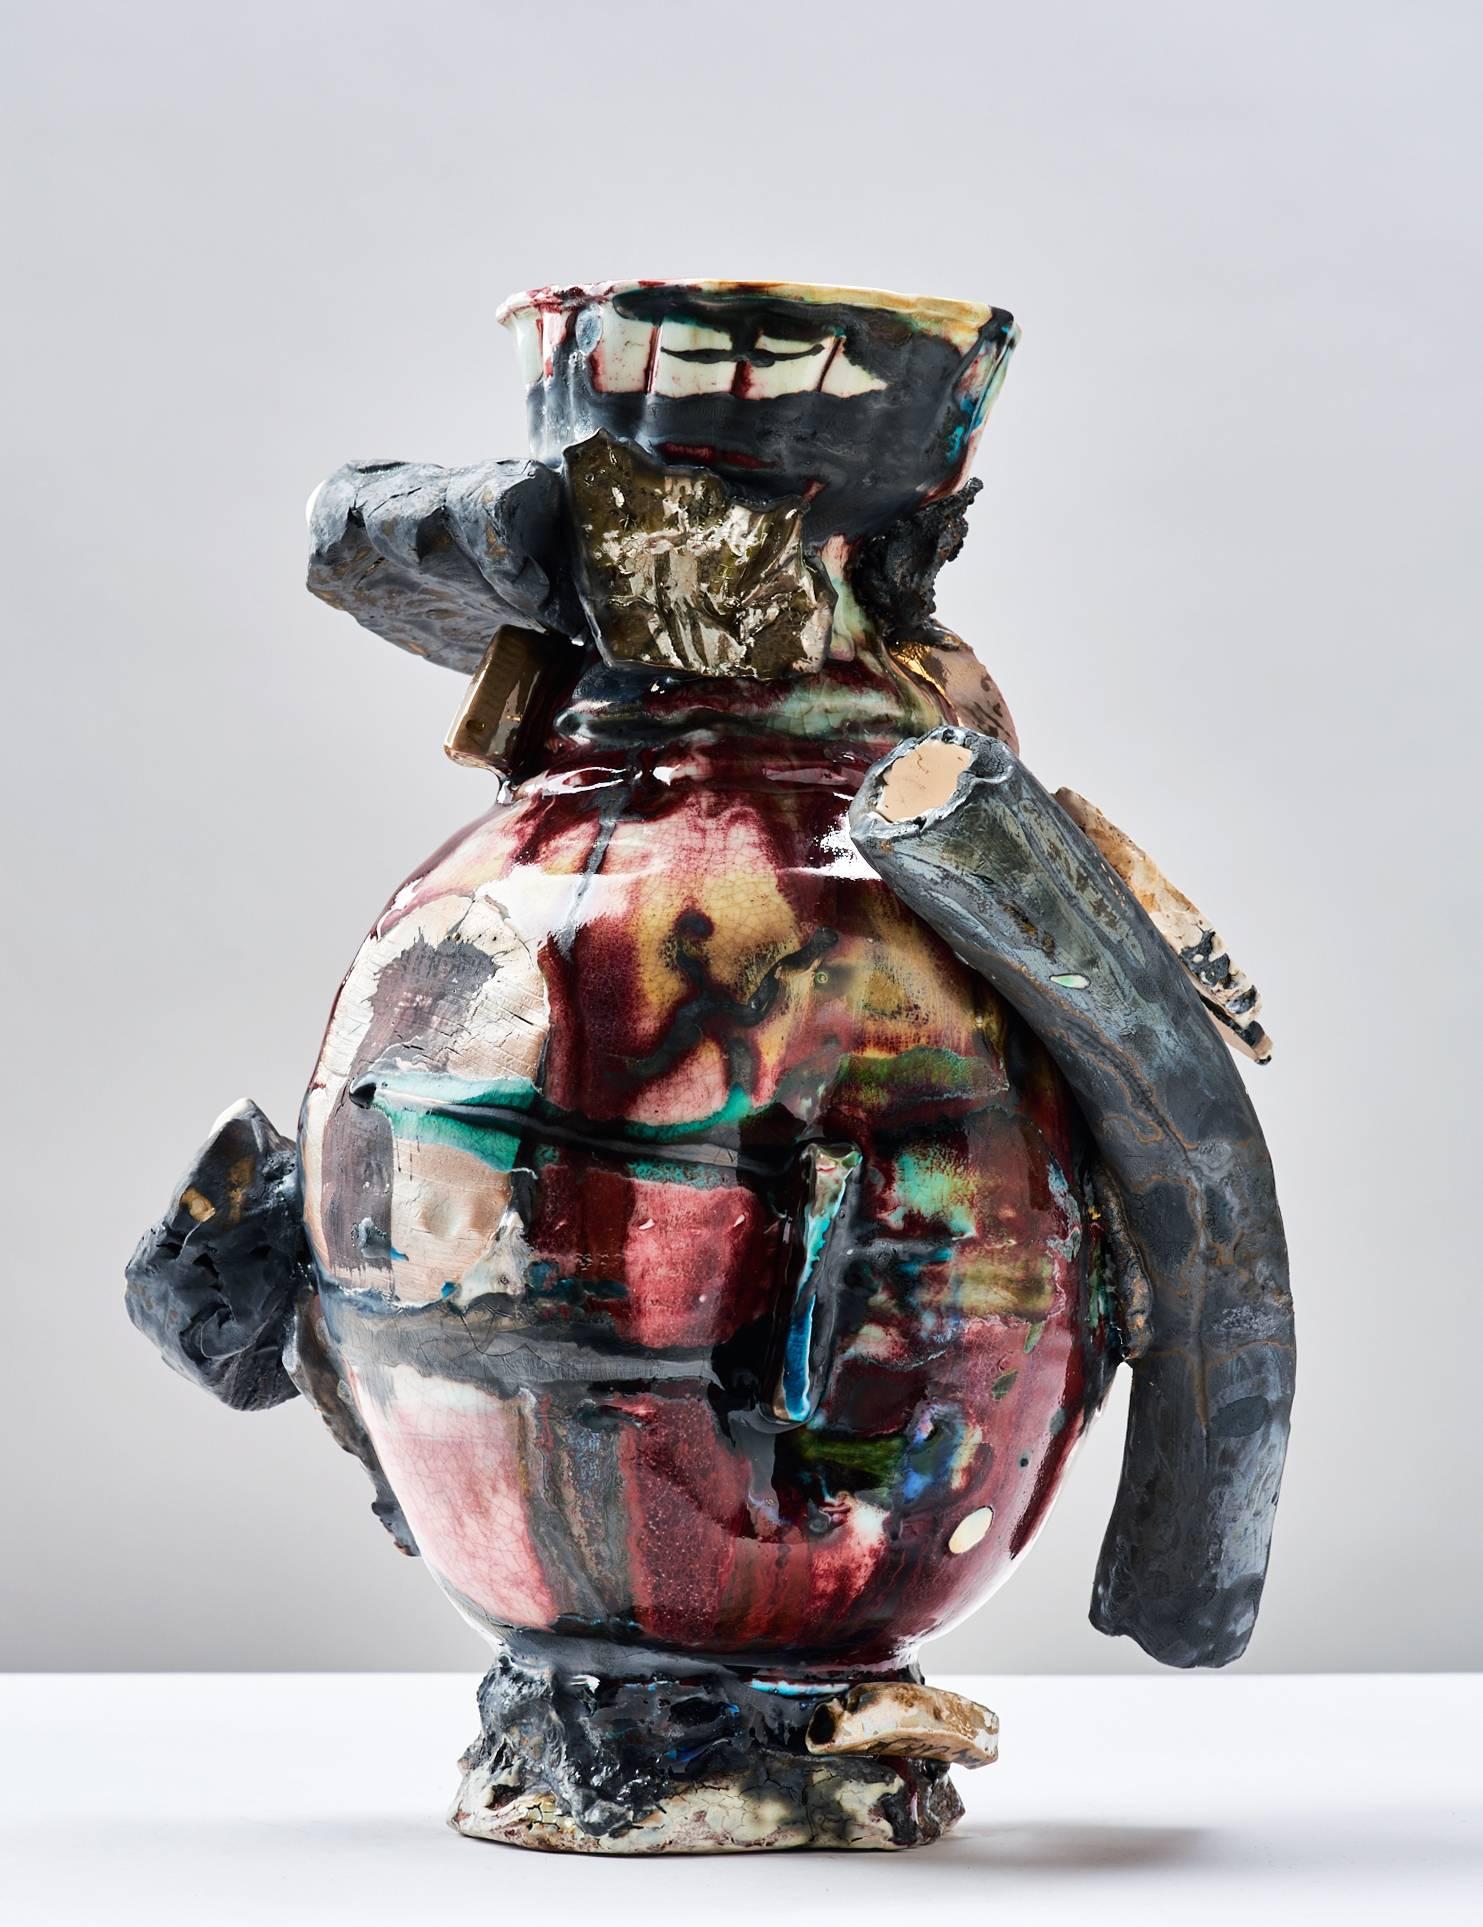 Each of Gareth Mason’s ceramic jars represents a small cosmic explosion. Intensely expressive and energetic in character, Mason’s work reflects his eagerness to capture the dynamics and the mysteries of creation. Immersed in the transformative power